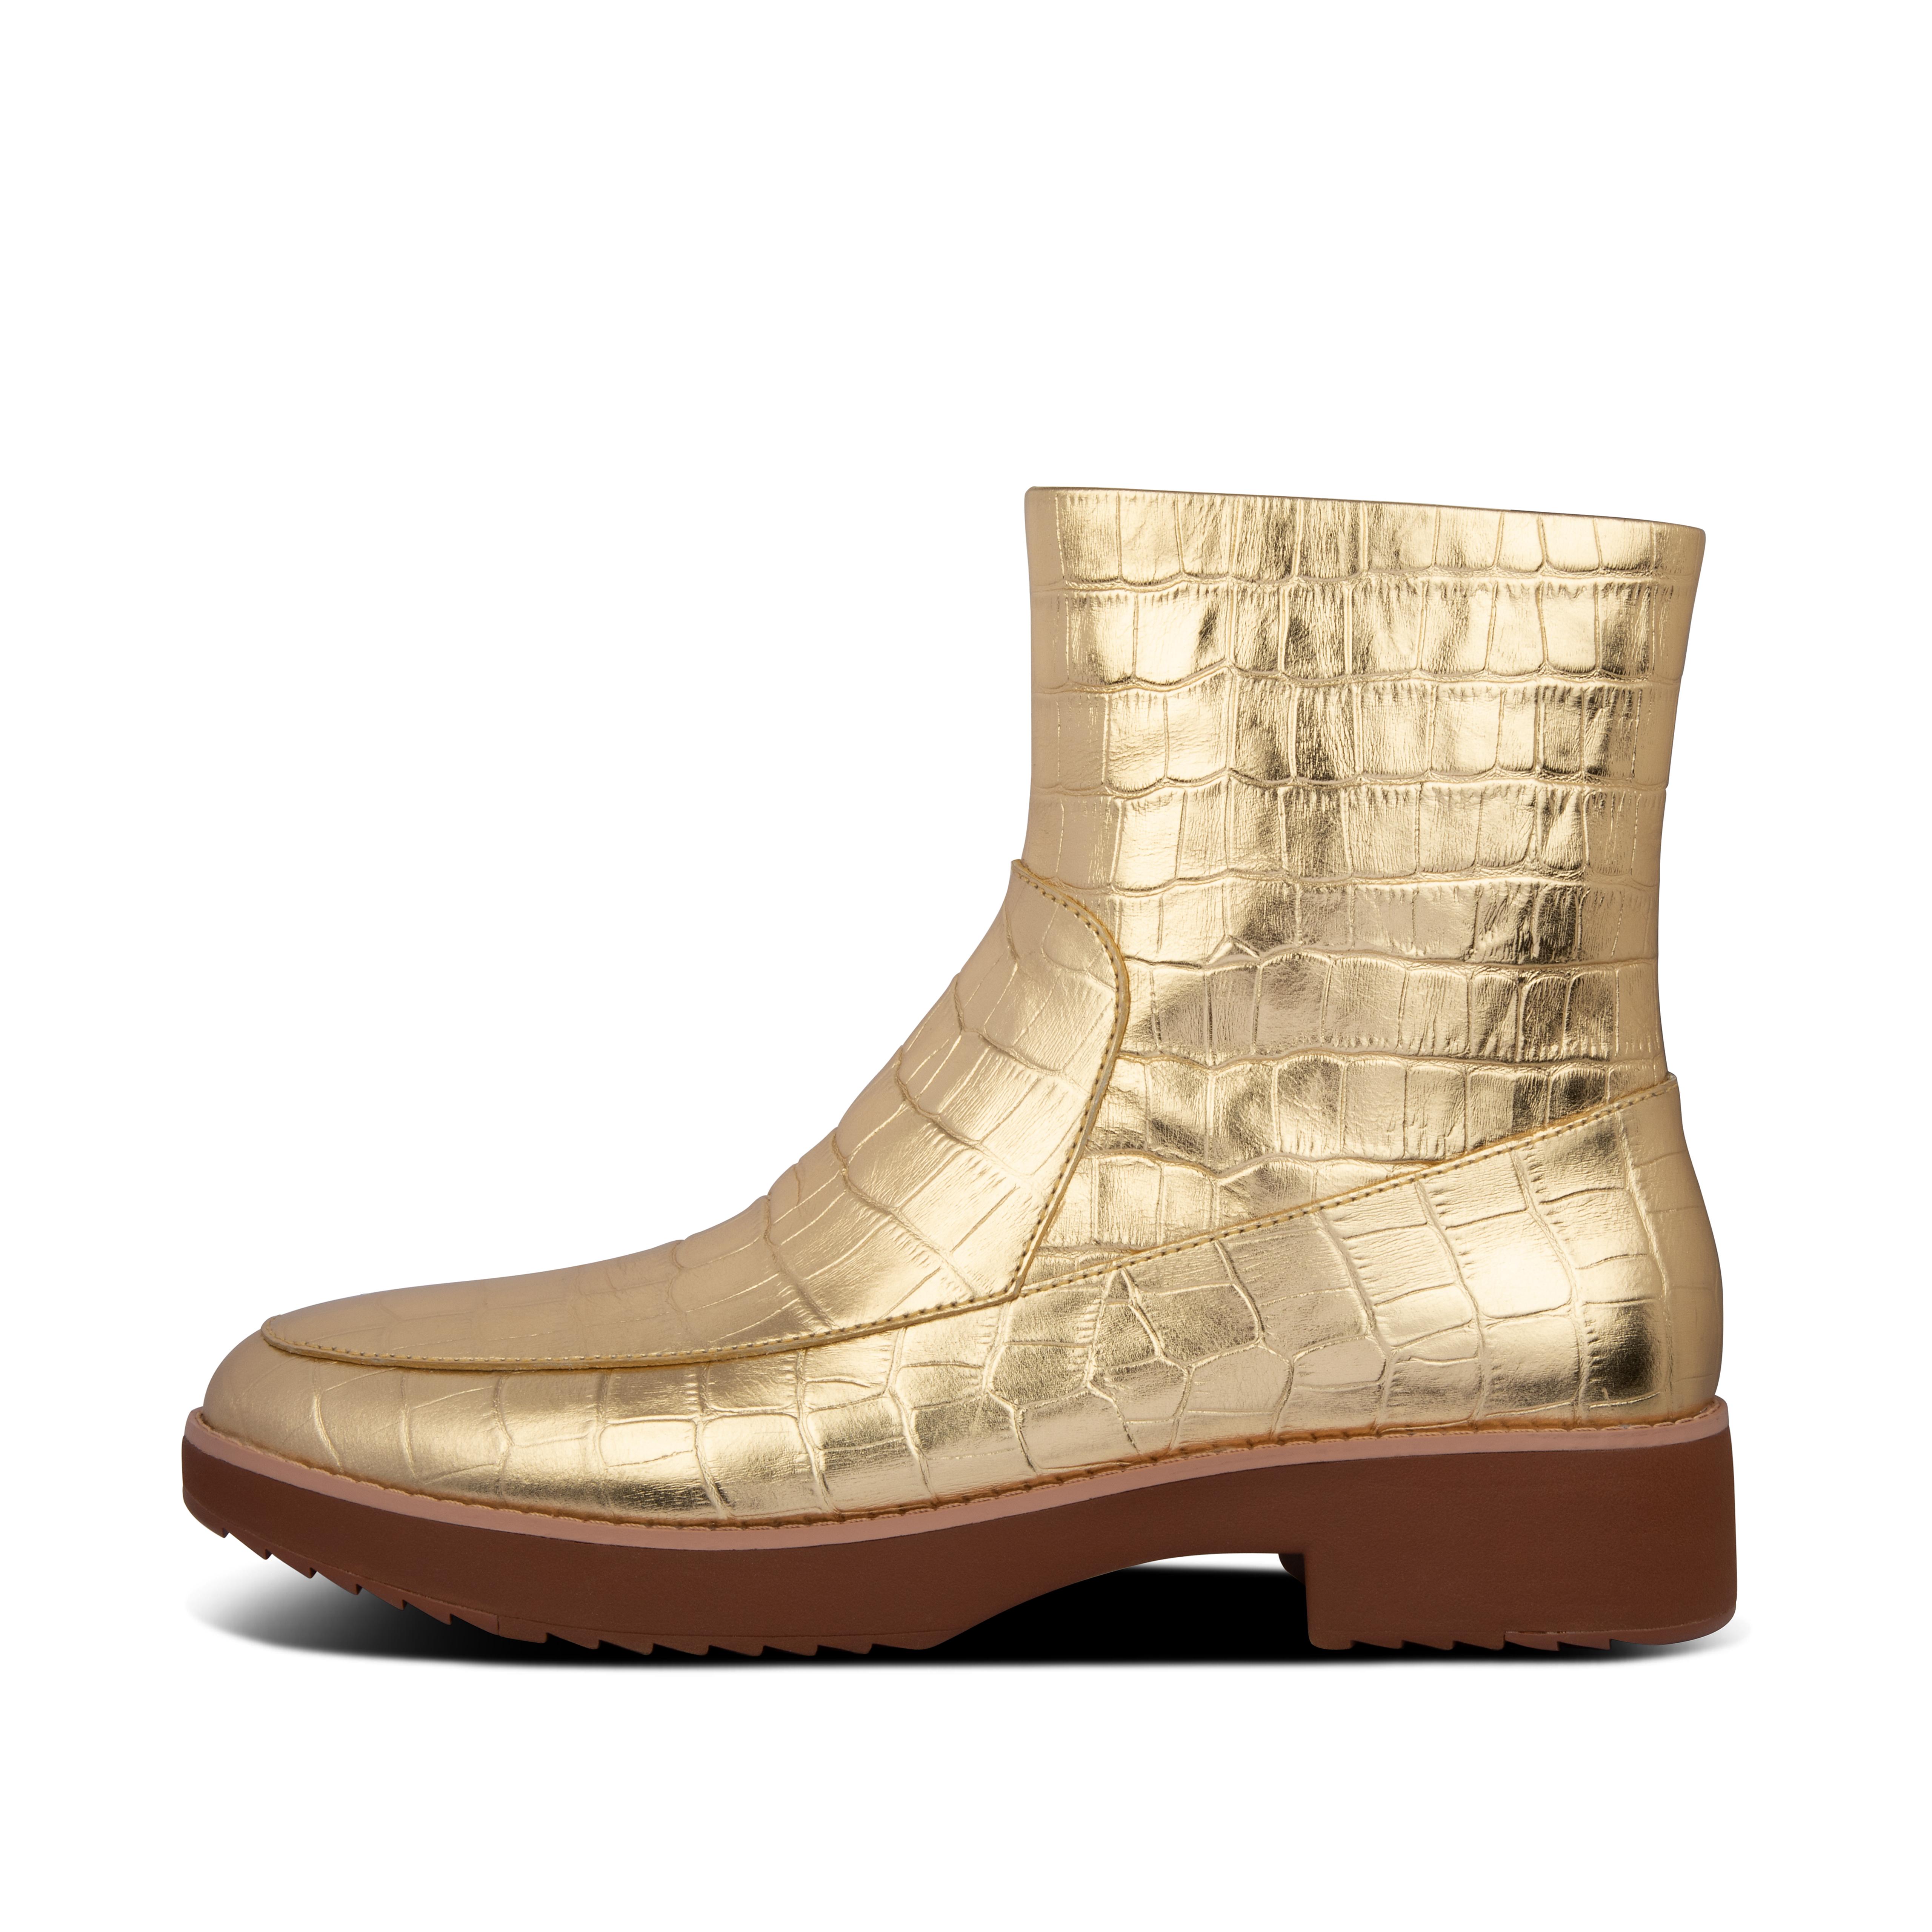 croc embossed leather boots